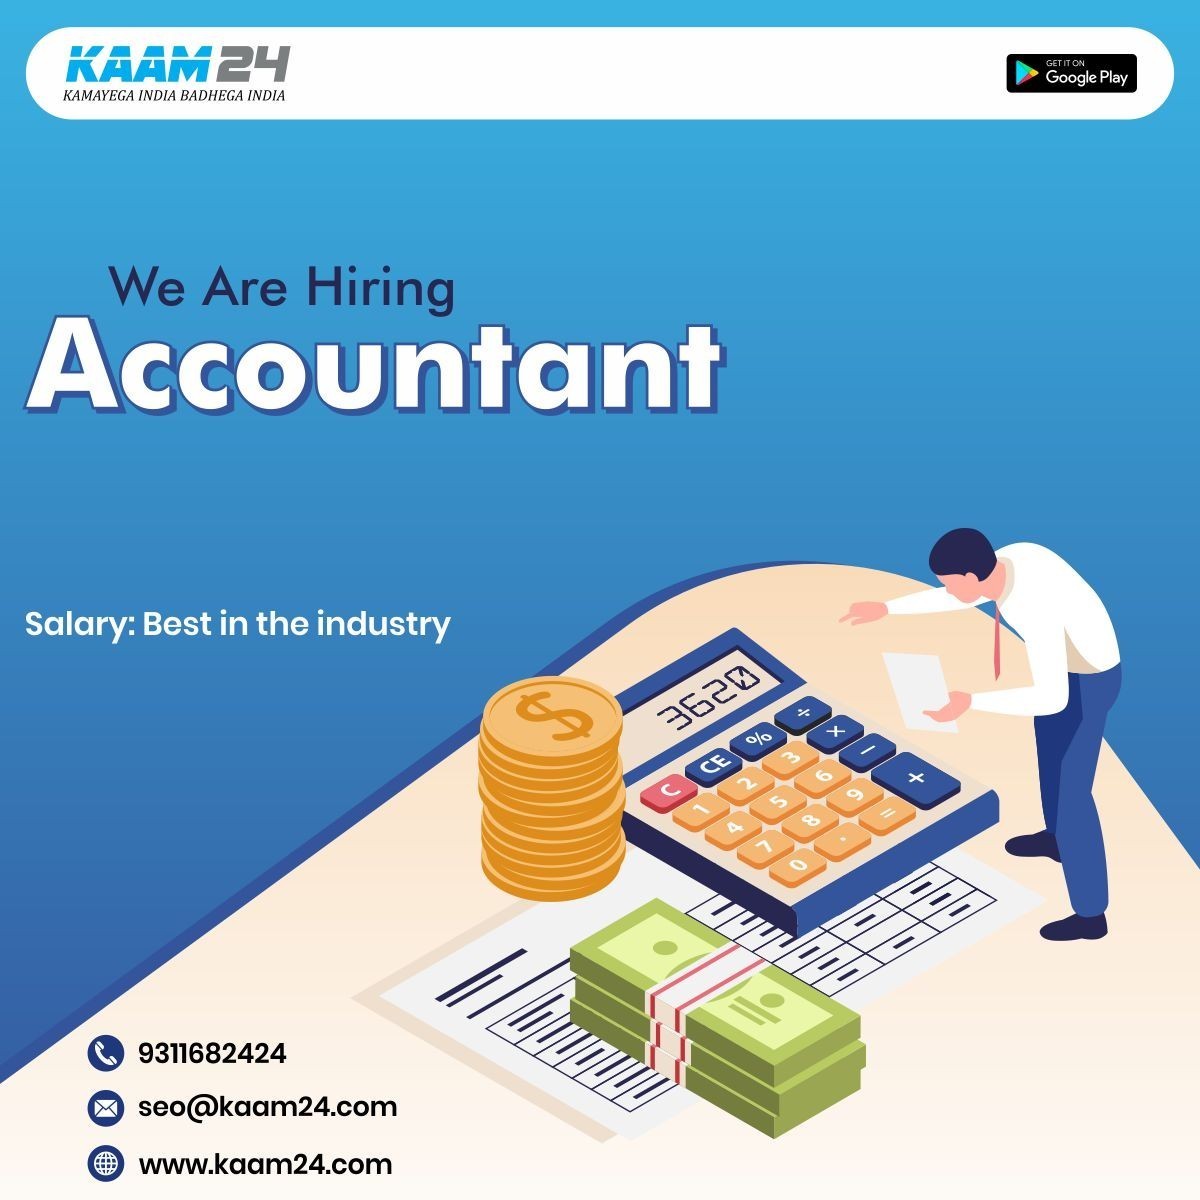 Jobs  Find Jobs  Apply for Accountant Jobs in India  Kaam24  Jobs 